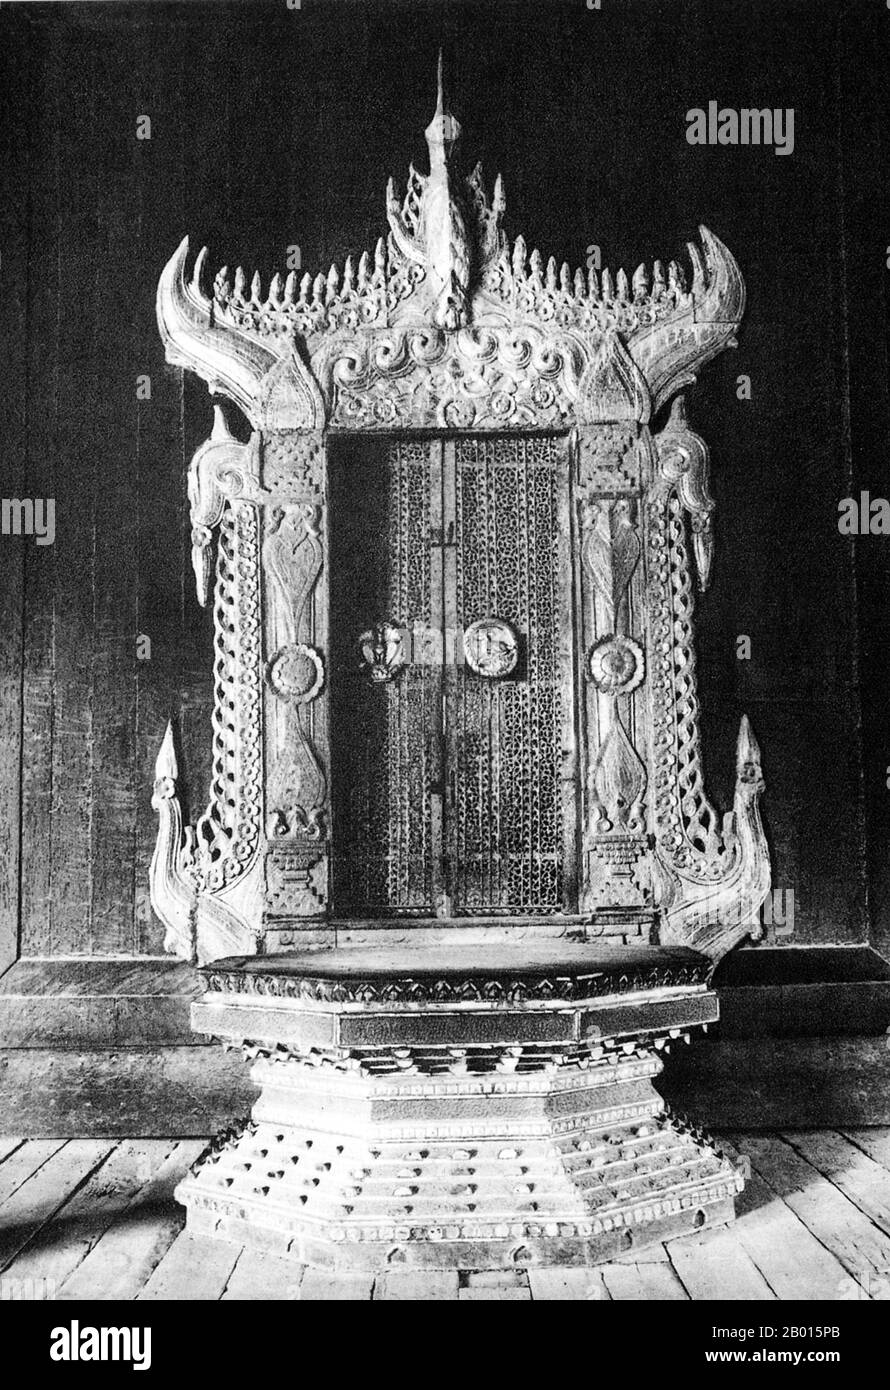 Burma/Myanmar: The Hamsa (Goose) Throne within Mandalay Palace, c. 1920s.  Mandalay Palace was constructed between 1857 and 1859 as part of King Mindon's new royal capital city of Mandalay, in fulfillment of a Buddhist prophecy that a religious centre would be built at the foot of Mandalay Hill. In 1861 the court was transferred to the newly built city from the previous capital of Amarapura.  The plan of Mandalay Palace largely follows the traditional Burmese palace design, inside a walled fort surrounded by a moat. The palace itself is at the centre of the citadel and faces east. Stock Photo